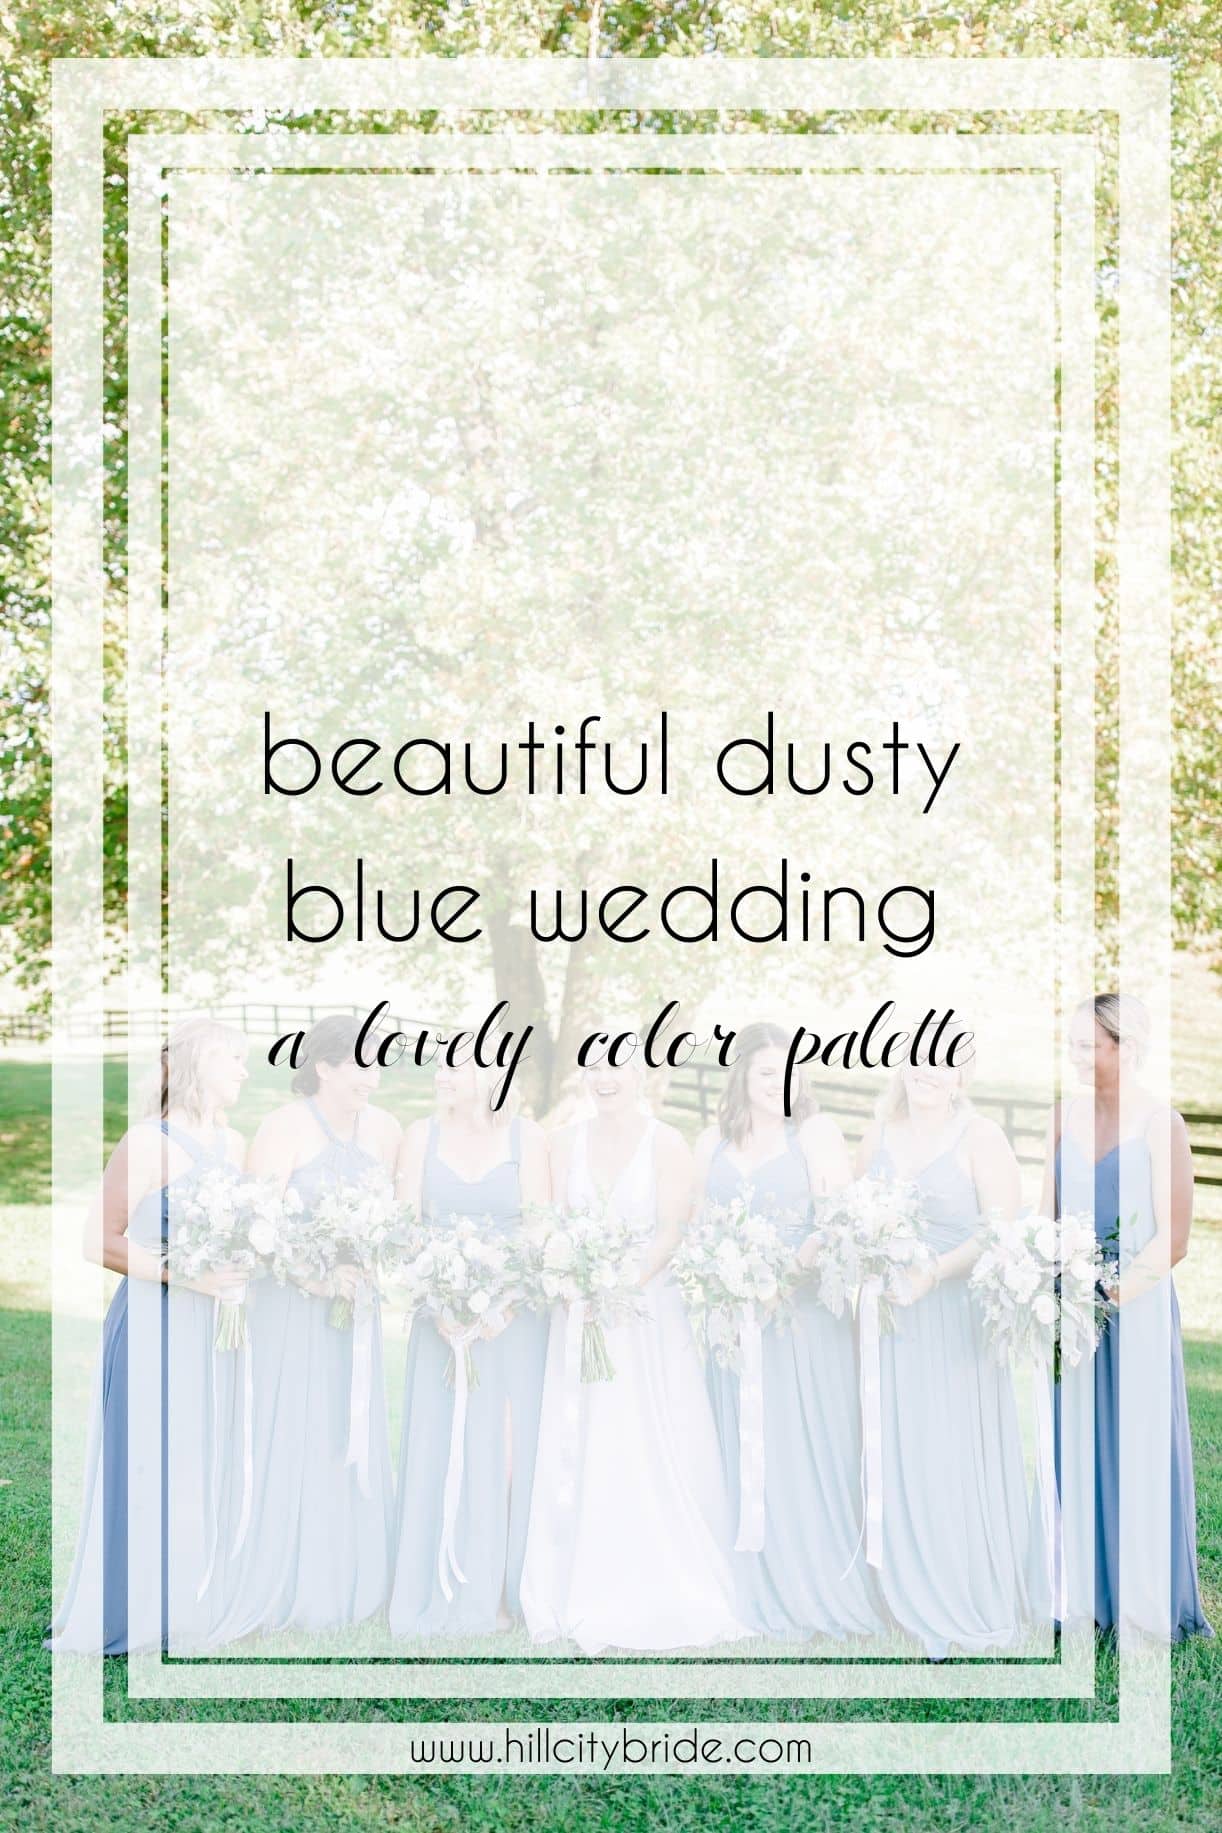 Use These Beautiful Dusty Blue Wedding Ideas for Your Big Day